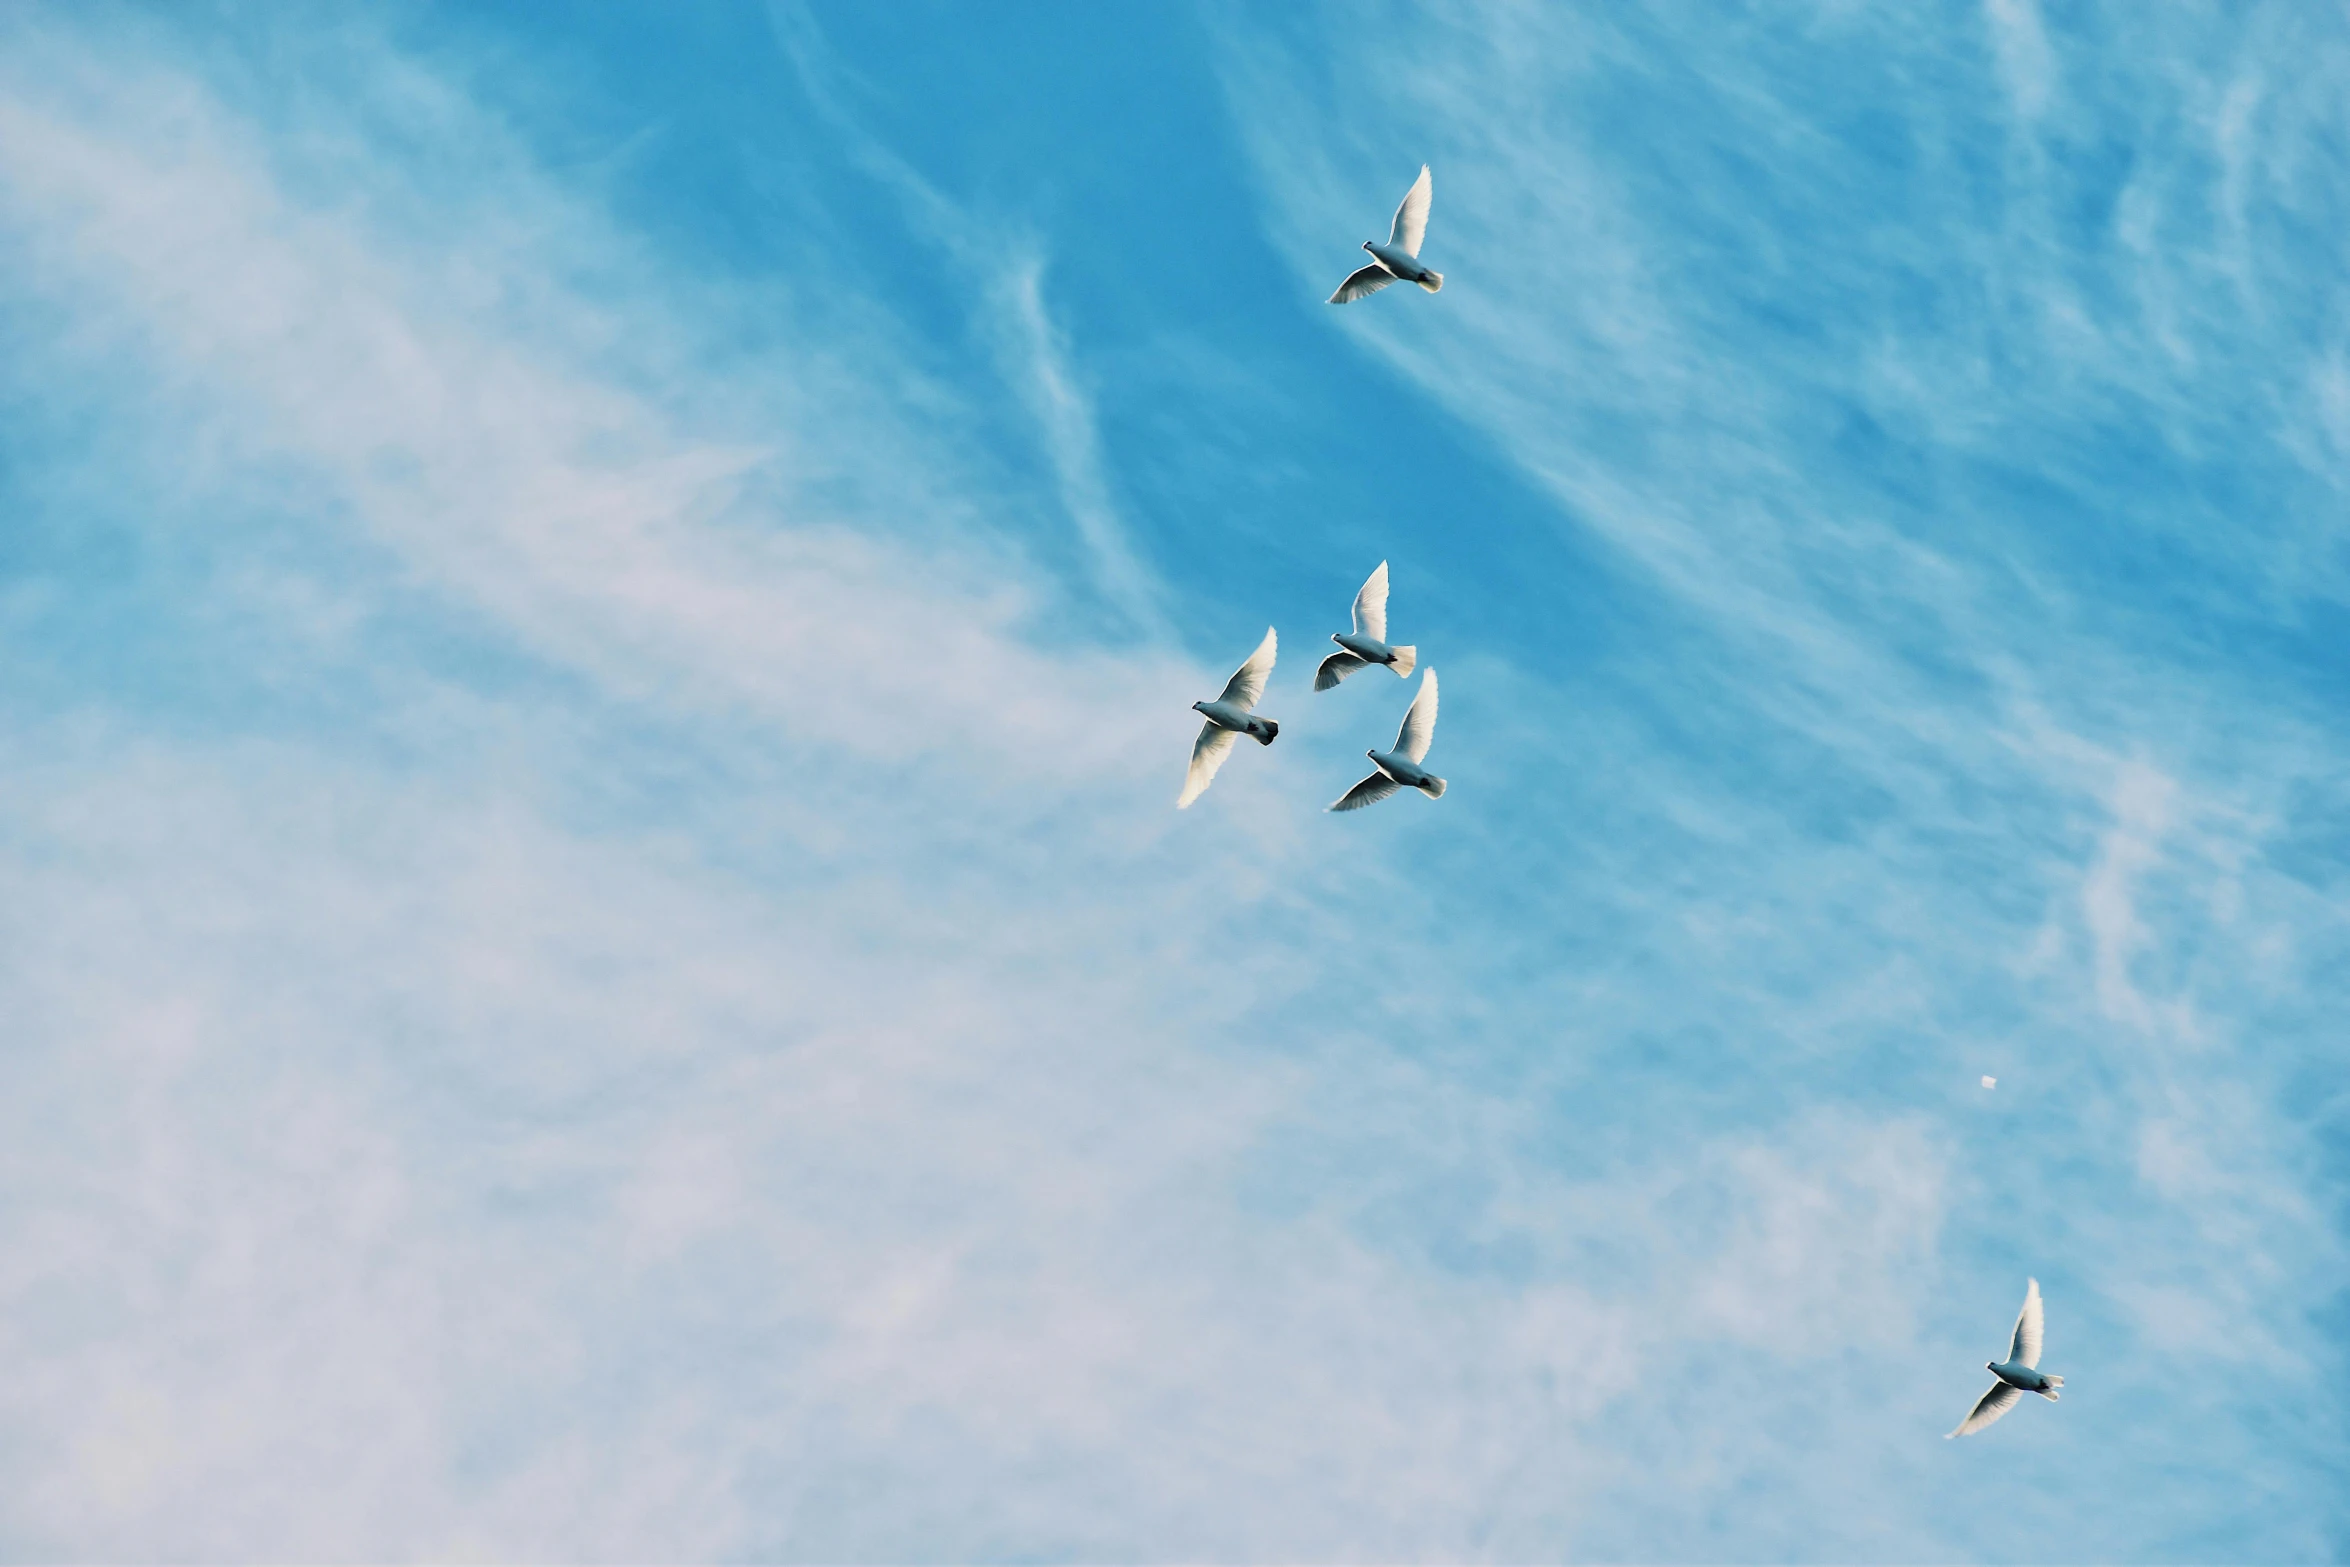 there are three birds that are flying in the sky